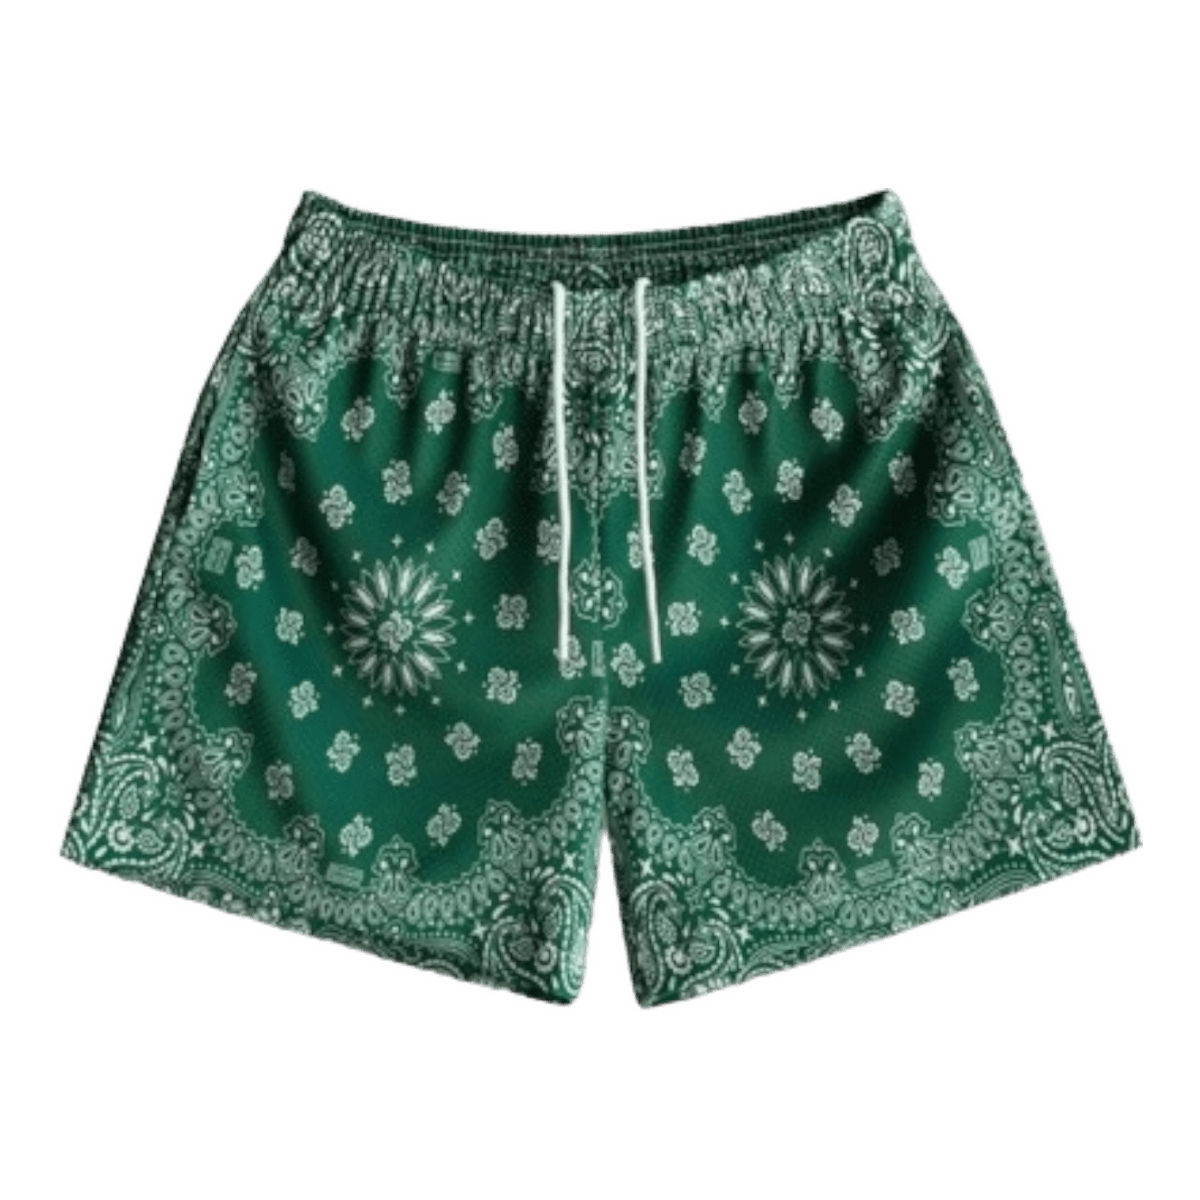 Bravest Studios Green Paisley Player Shorts - Shorts - Jawns on Fire Sneakers & Streetwear